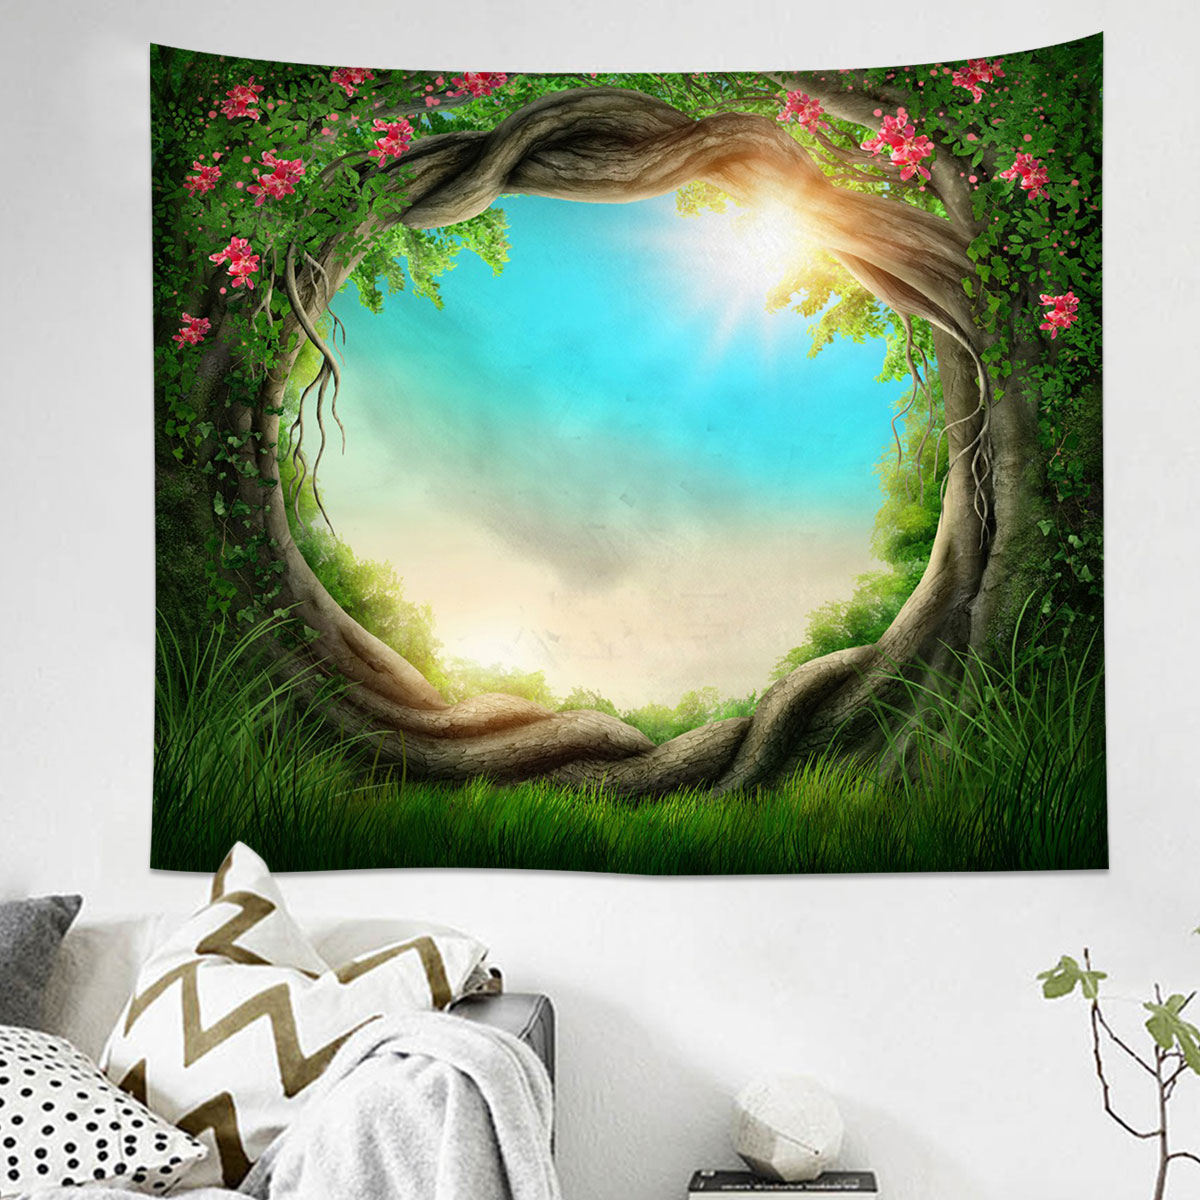 Polyester-Fancy-Moon-Light-Tapestry-Throw-Mat-Yoga-Rug-Wall-Hanging-Home-Decor-Art-Crafts-1482752-5